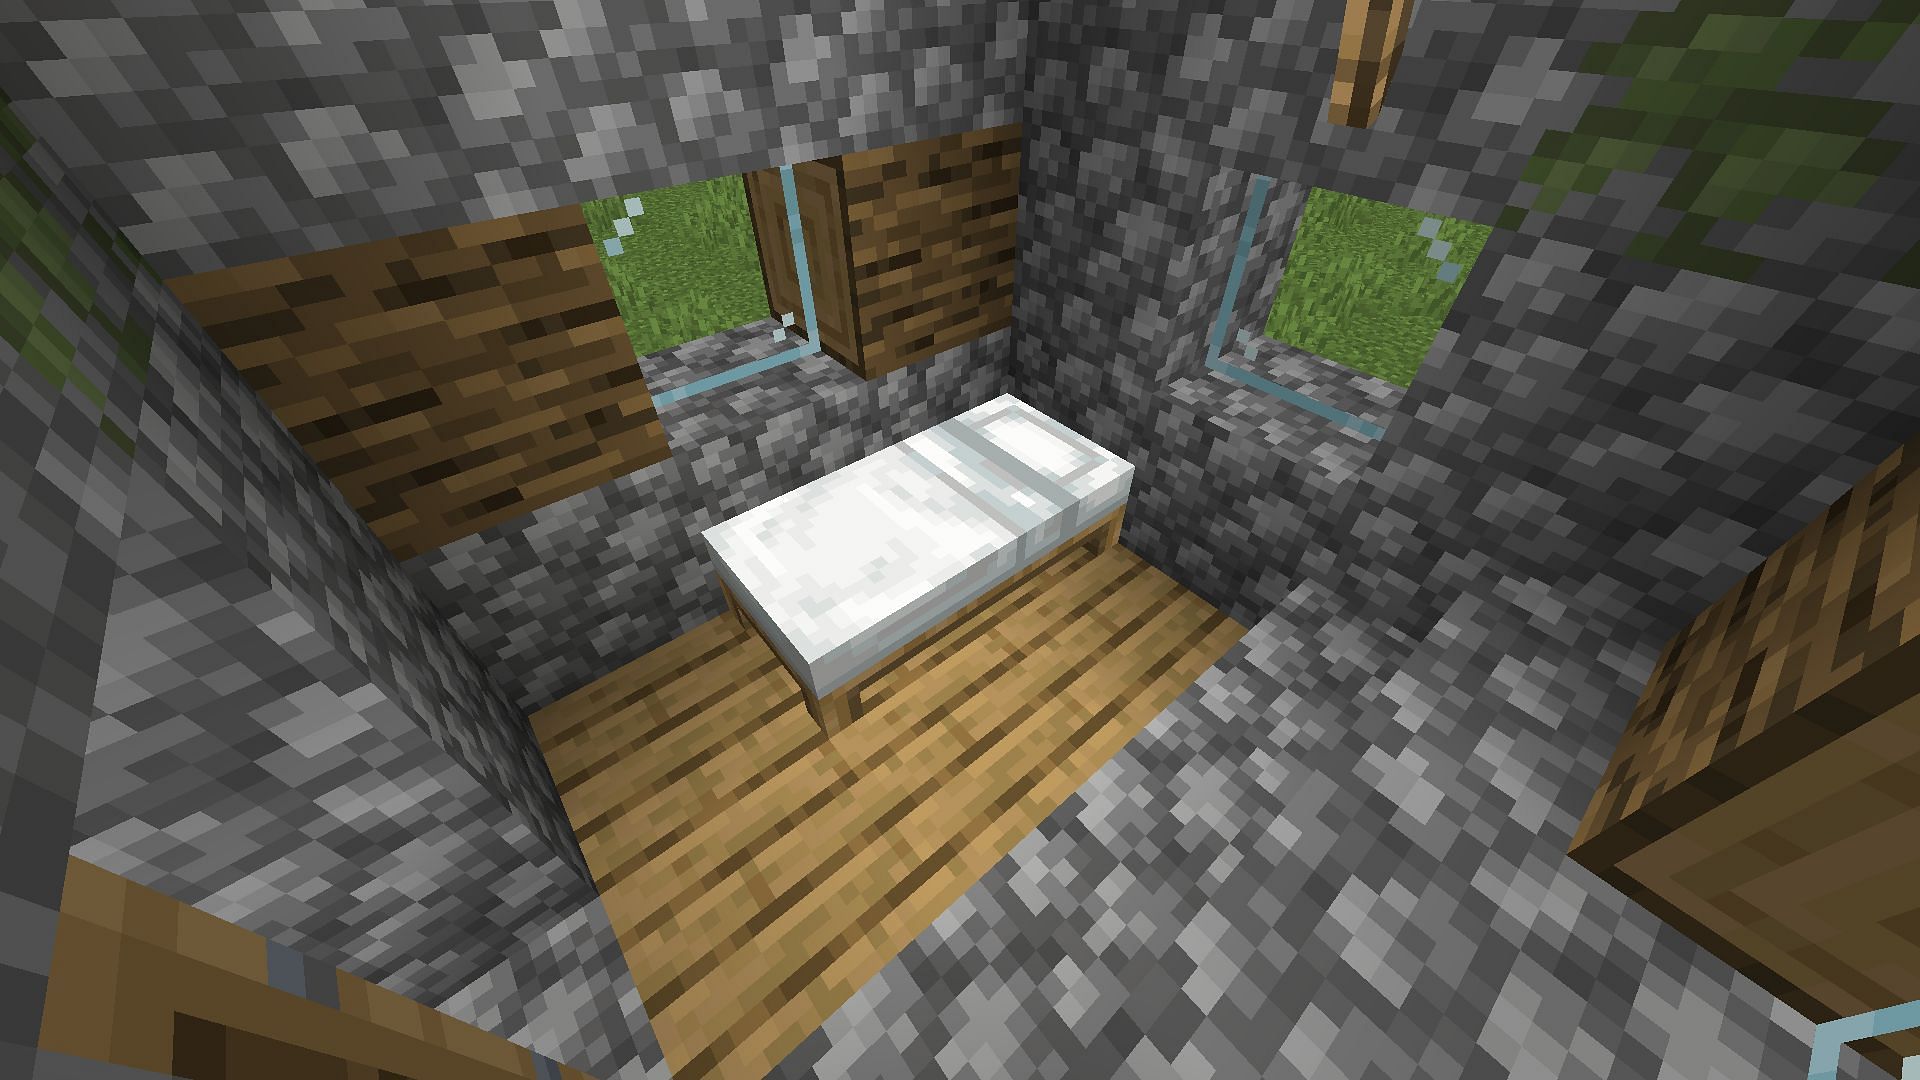 Players must sleep to protect themselves and the village from hostile mobs in Minecraft 1.19 (Image via Mojang)